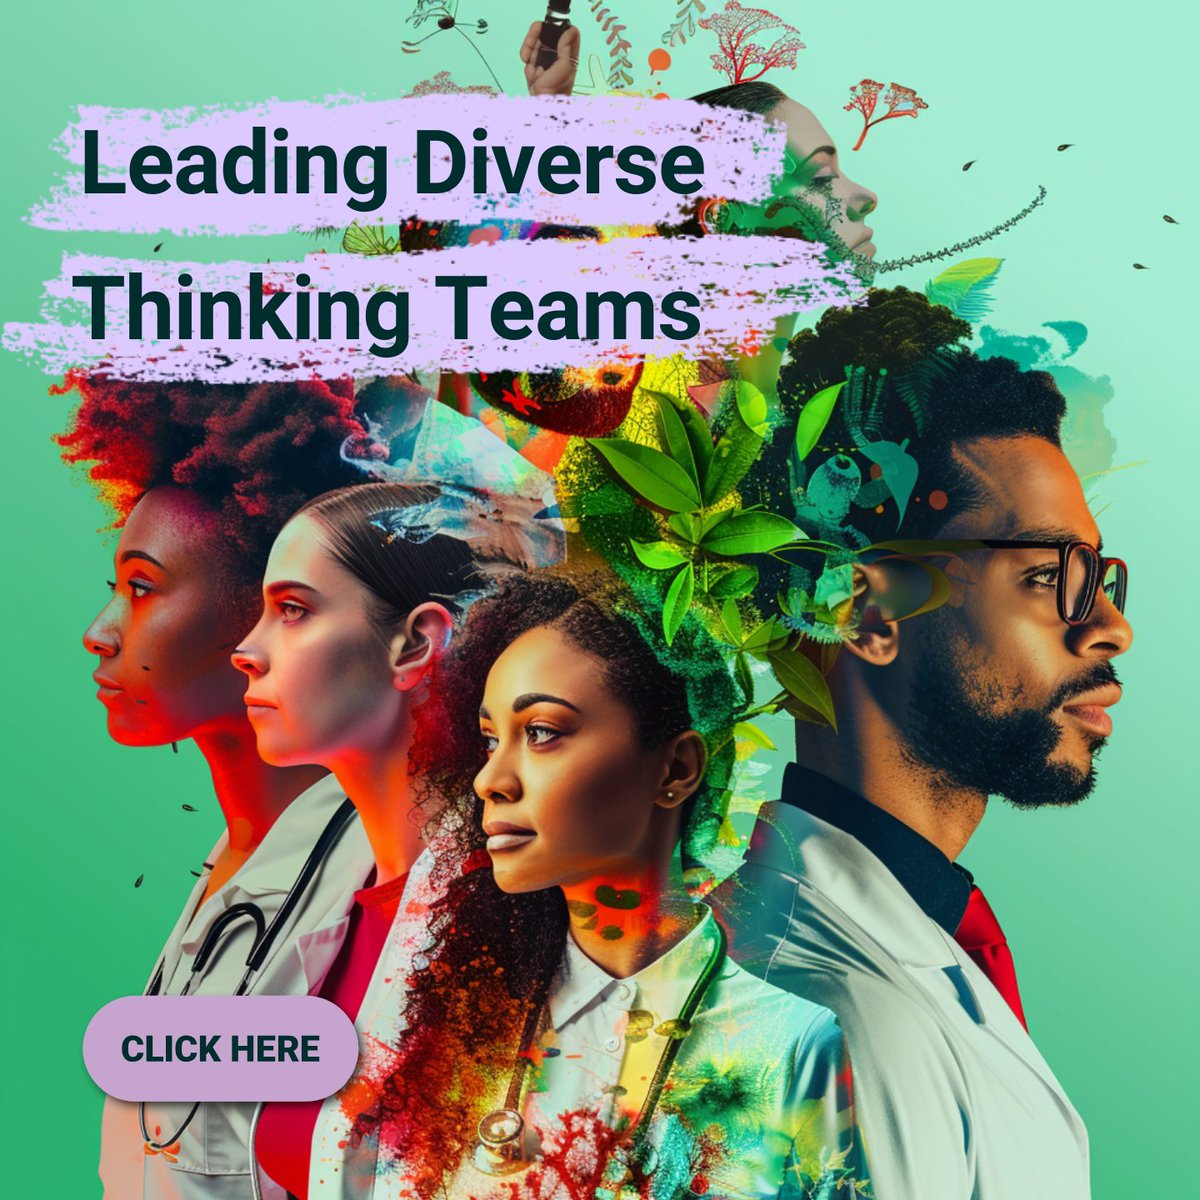 We explore #multipleintelligences, celebrate the power of #diversethinking, & reveal 4 ways for #leaders & #teams to #consciously lean into their intellectual #potential. 

ow.ly/qx3b50QHFyT 

#thoughtfrontiers #cognitivediversity #consciousorganisations #transformation